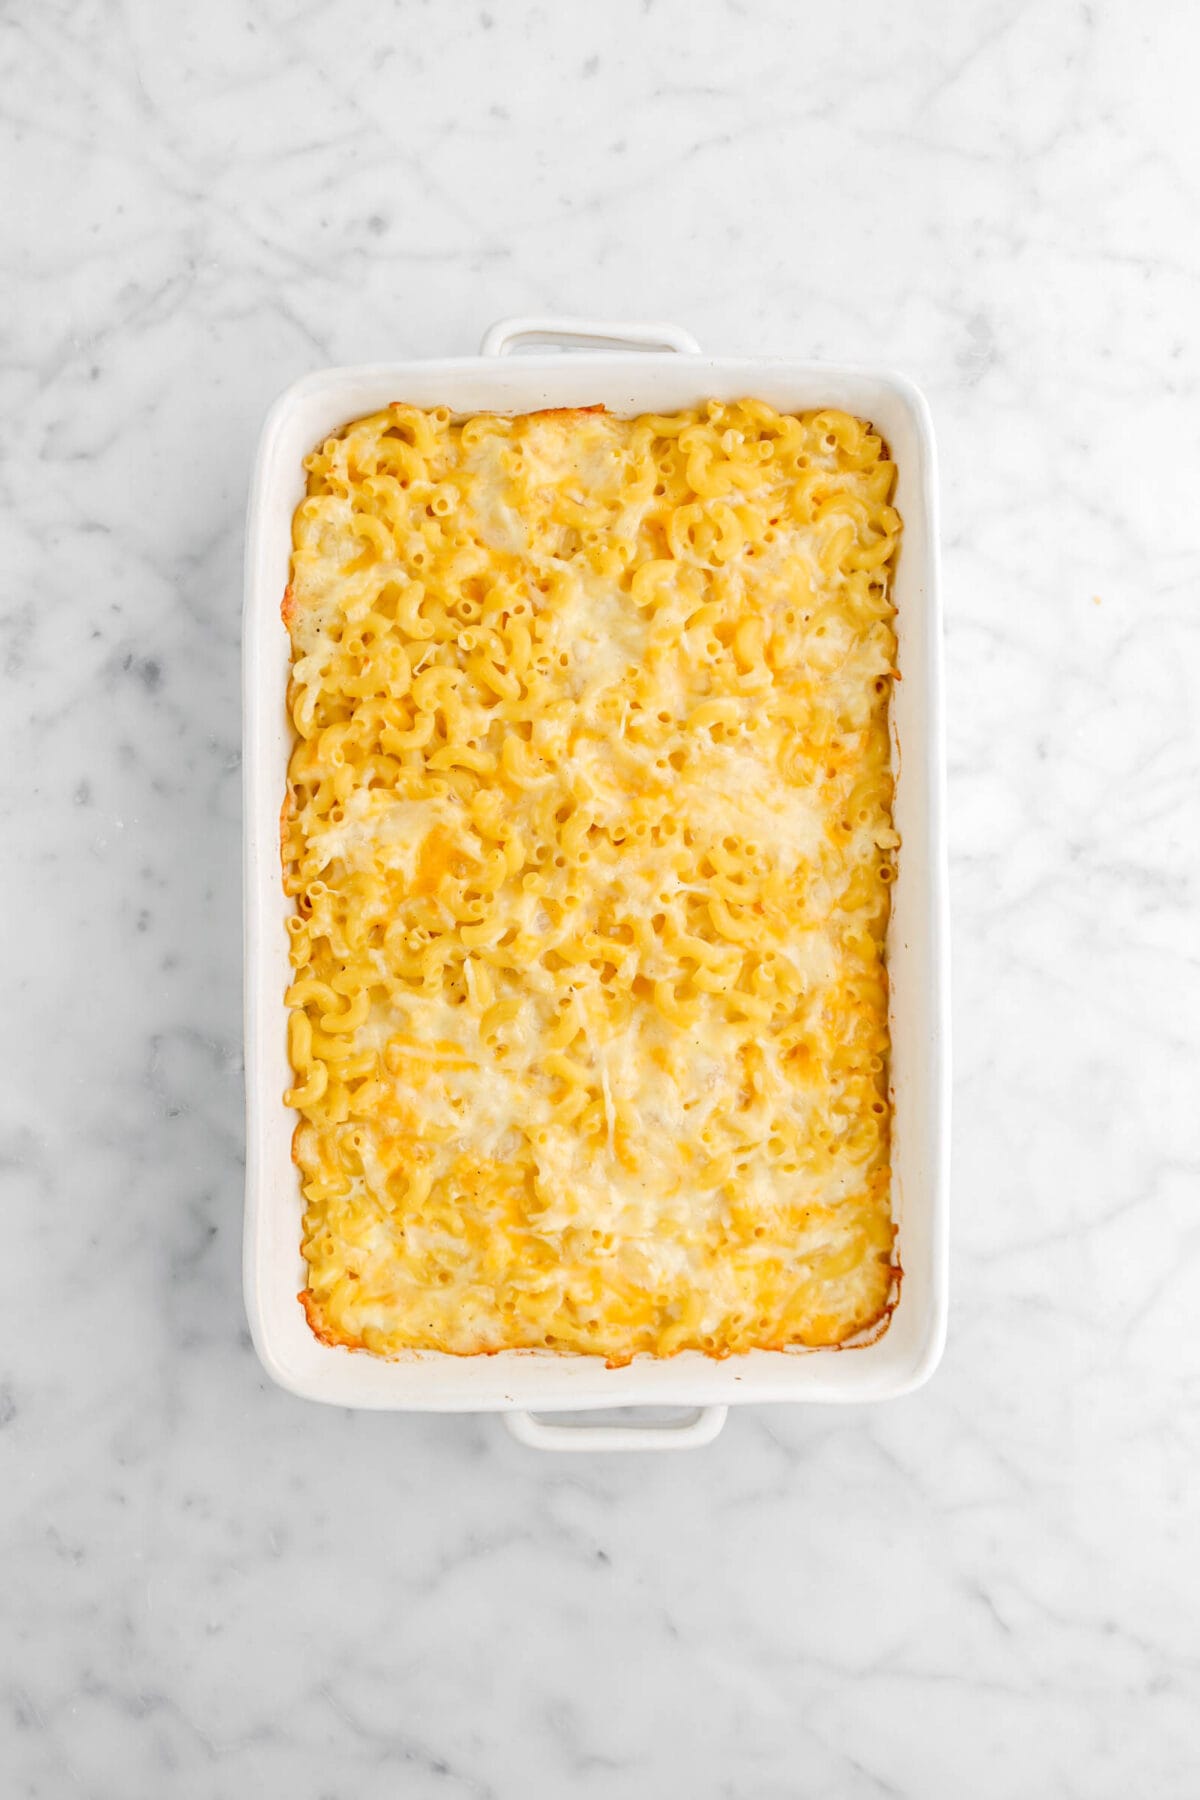 baked mac and cheese in white casserole on marble surface